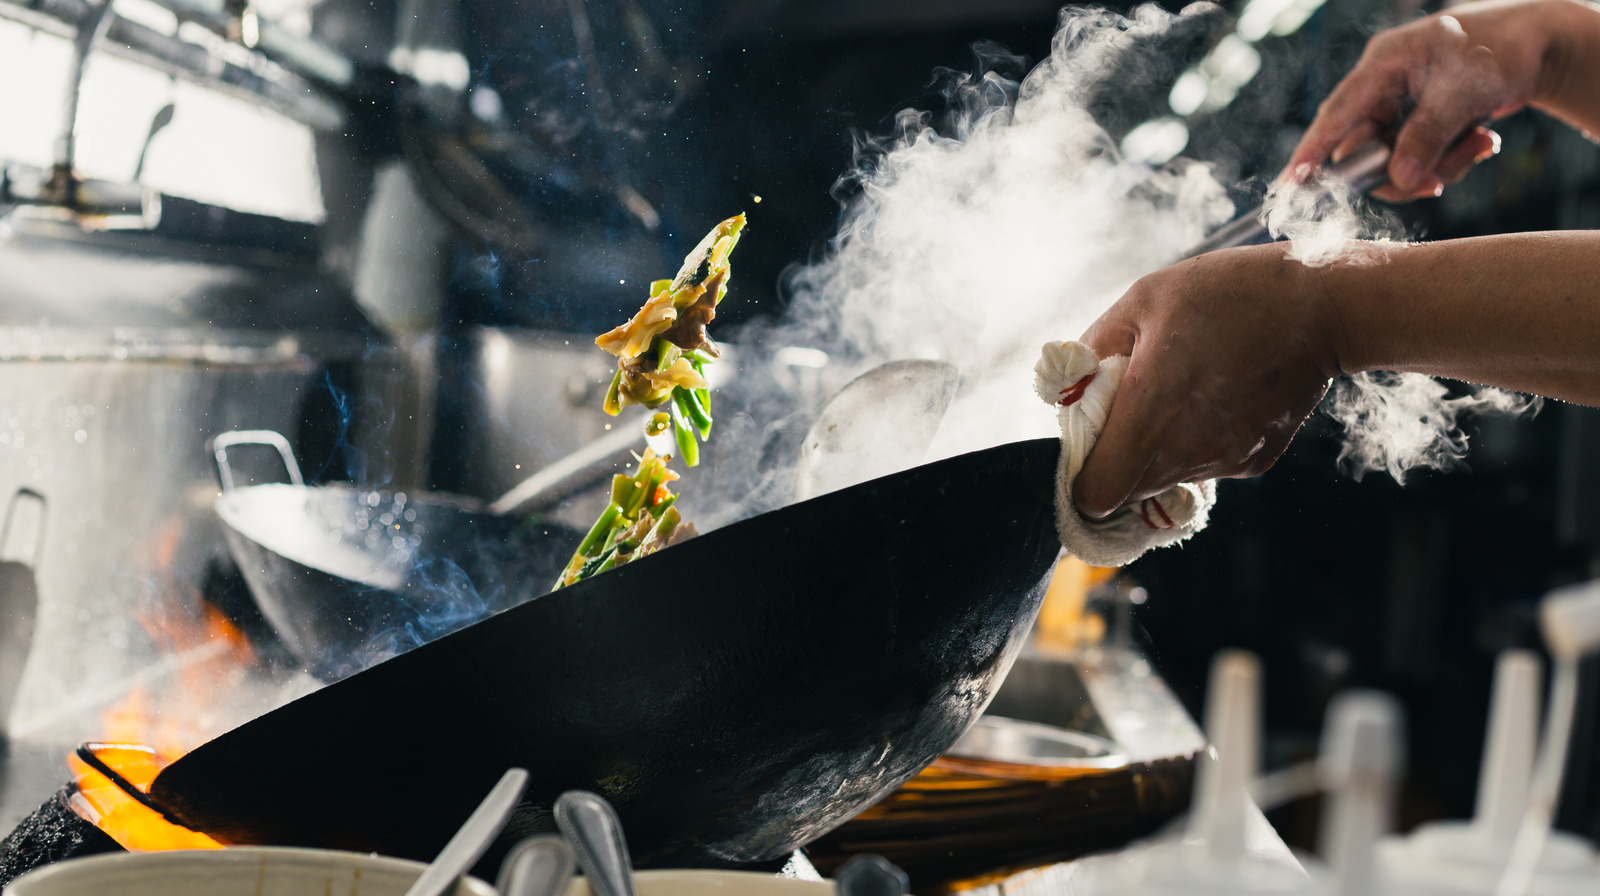 https://www.tastingtable.com/img/gallery/top-ten-tips-you-need-when-cooking-with-a-wok/l-intro-1648736253.jpg